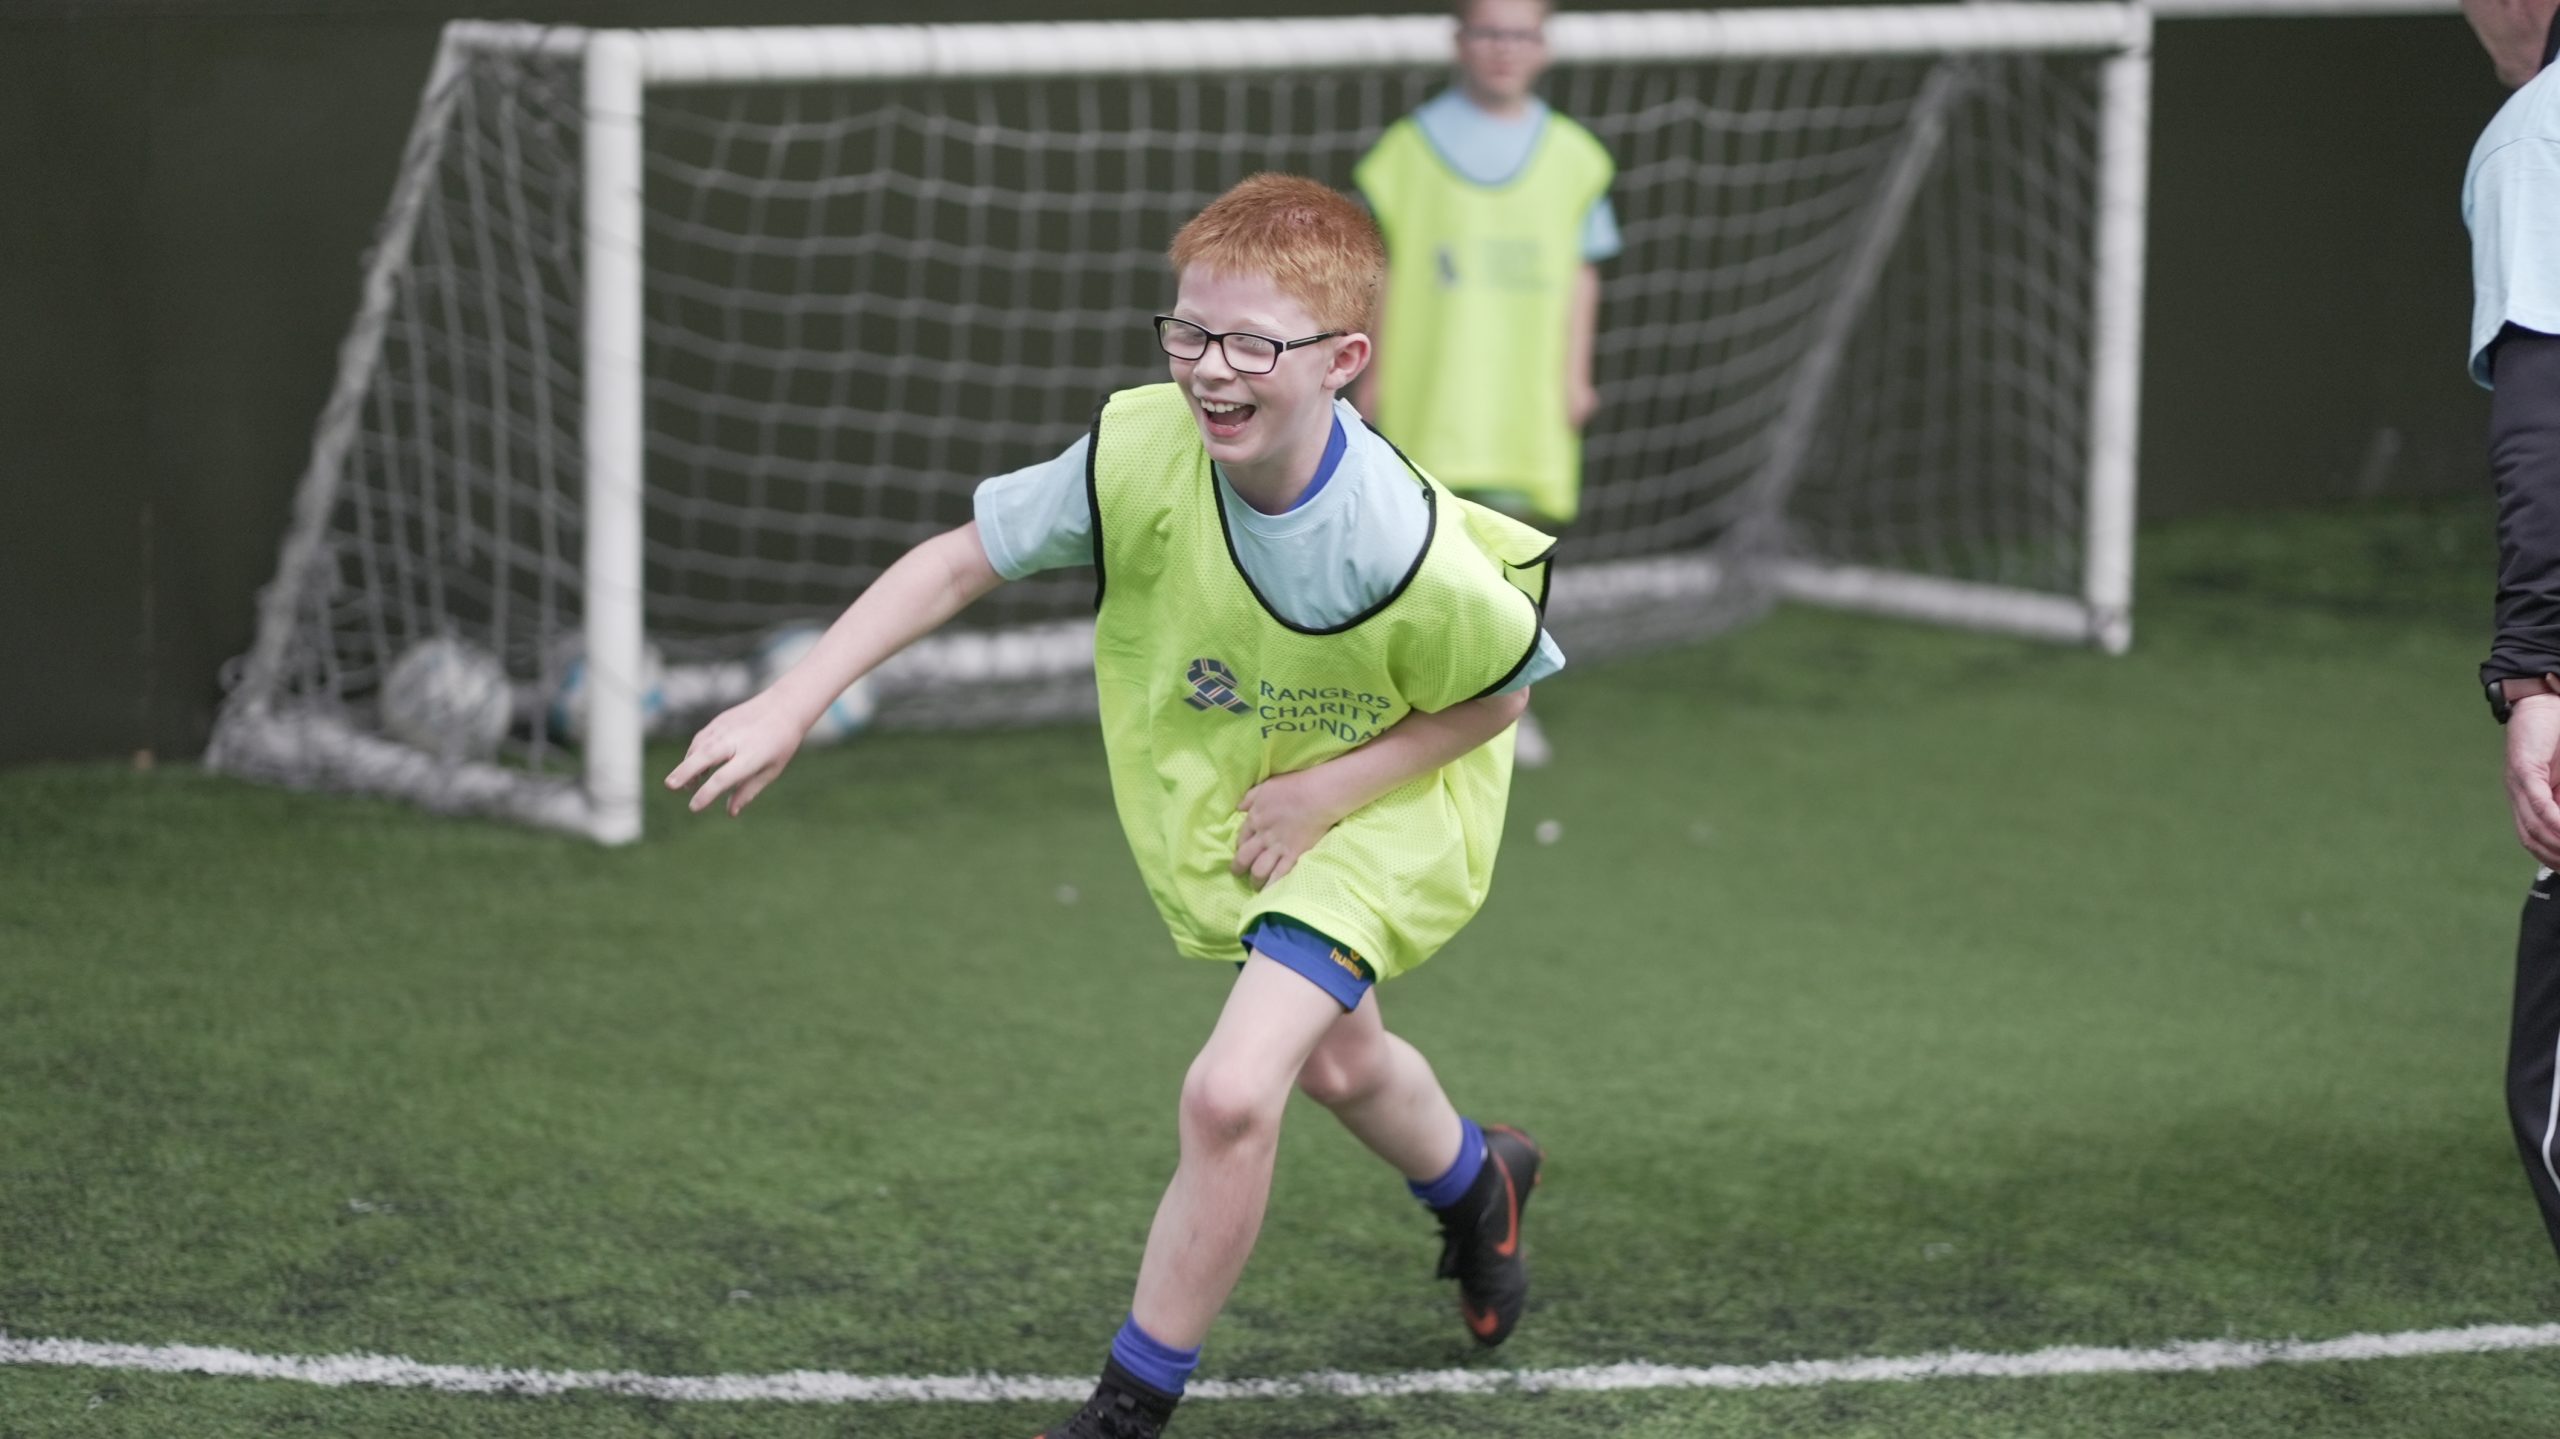 Visually Impaired child playing football